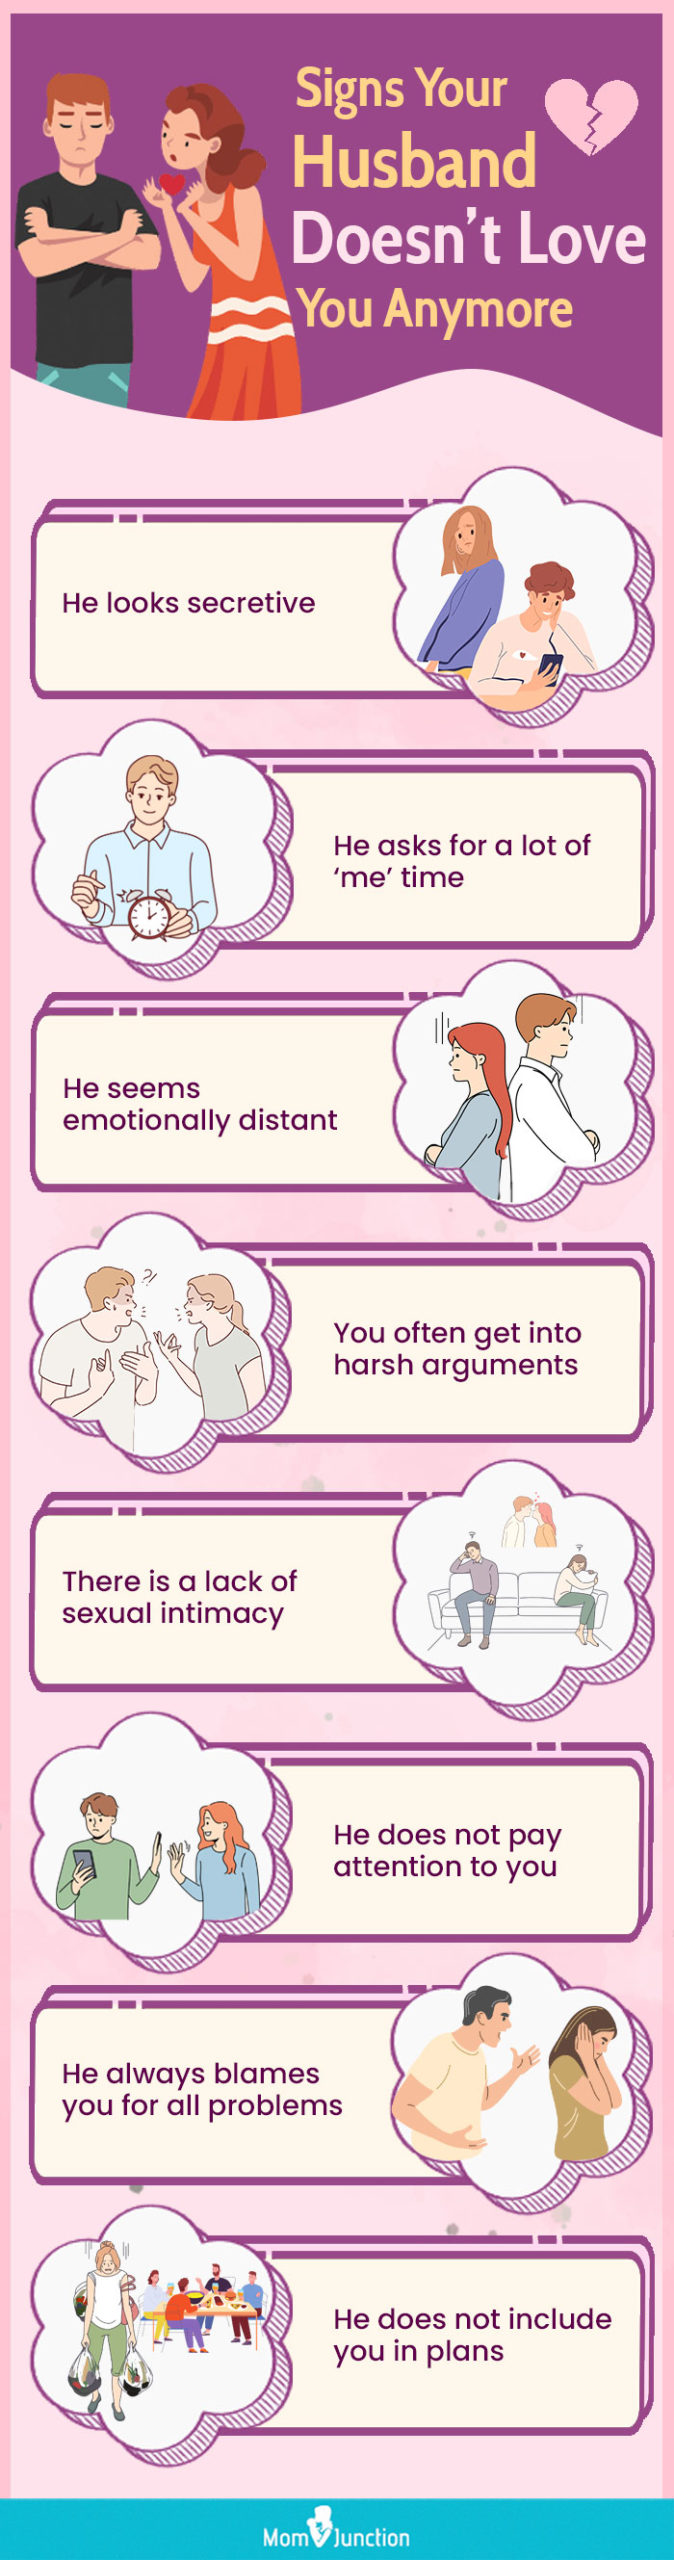 igns your husband doesnt love you anymore (infographic)